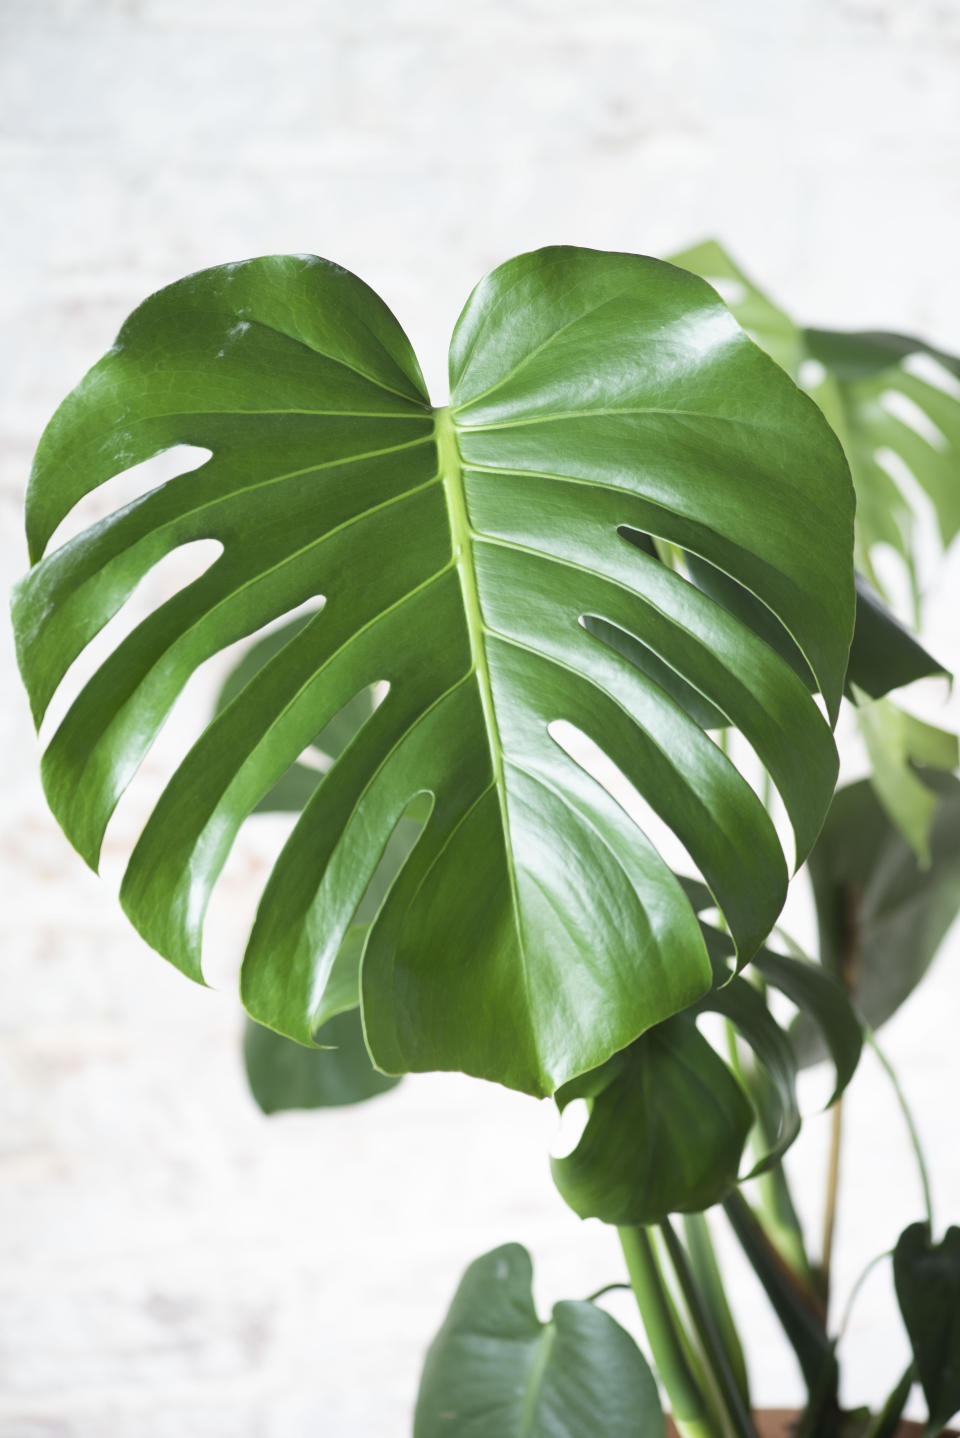 This undated image provided by the Horti houseplant subscription service shows a mature Monstera deliciosa houseplant. (Horti via AP)